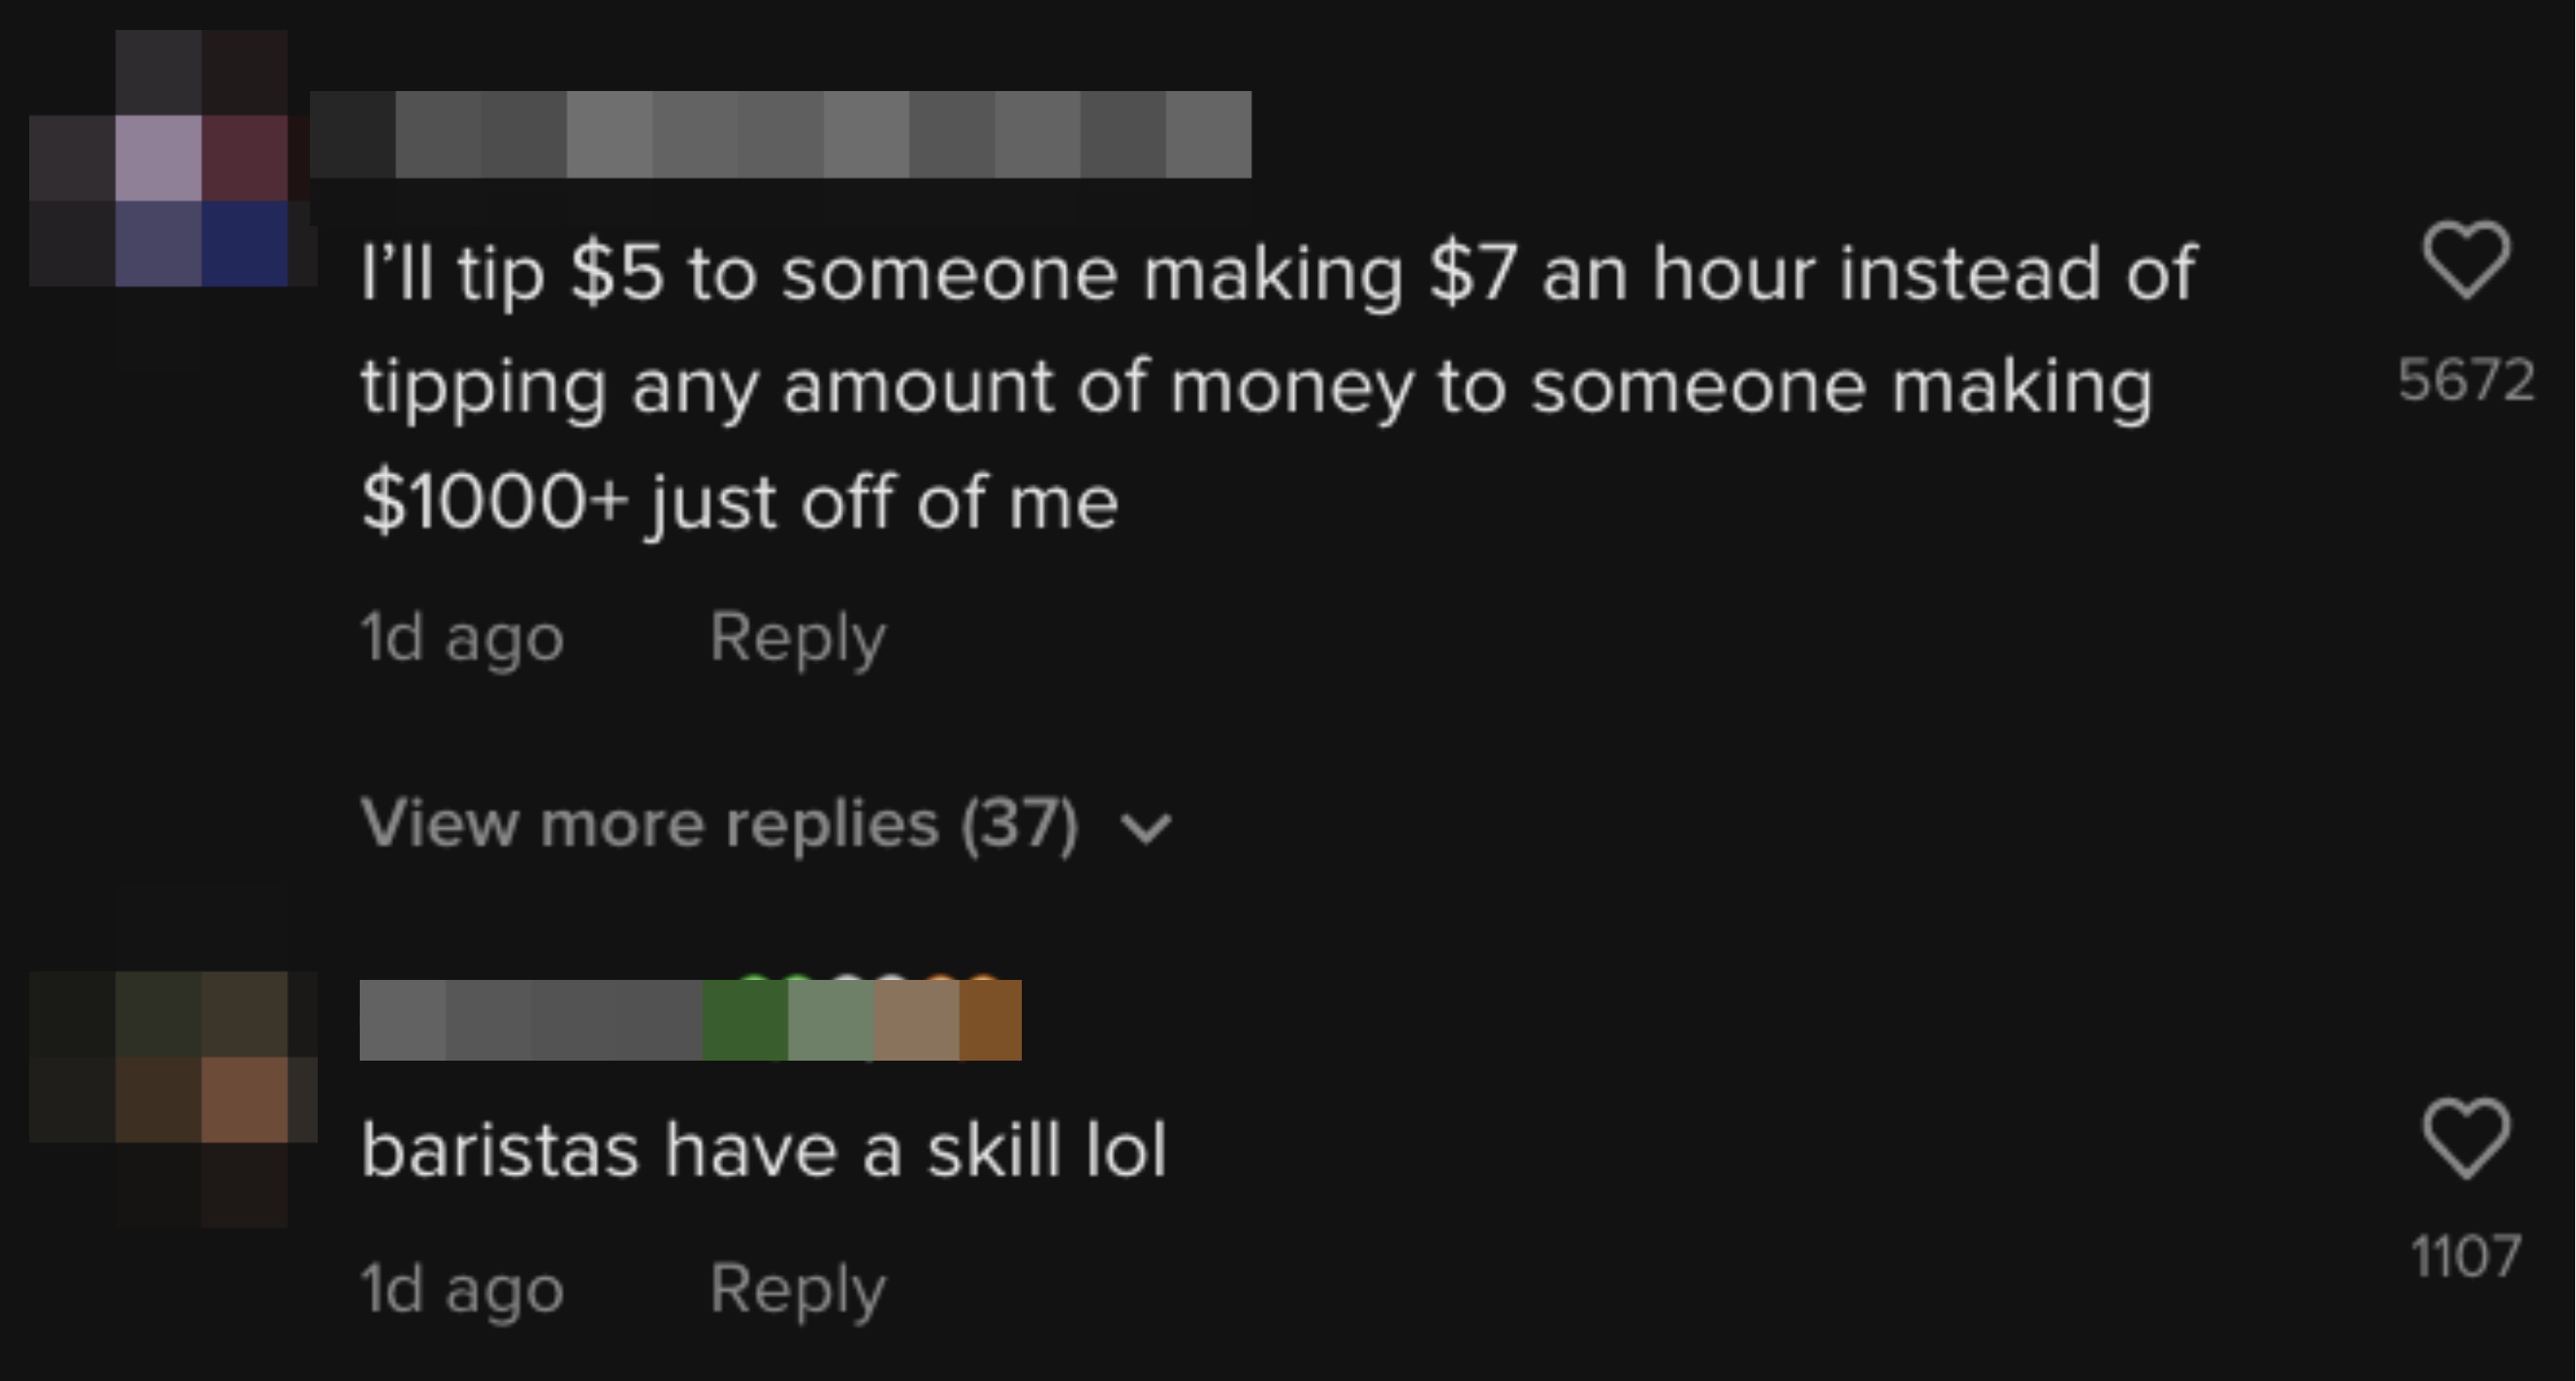 I&#x27;ll tip $5 to someone making $7 an hour instead of tipping any amount of money to someone making $1,000+ just off of me